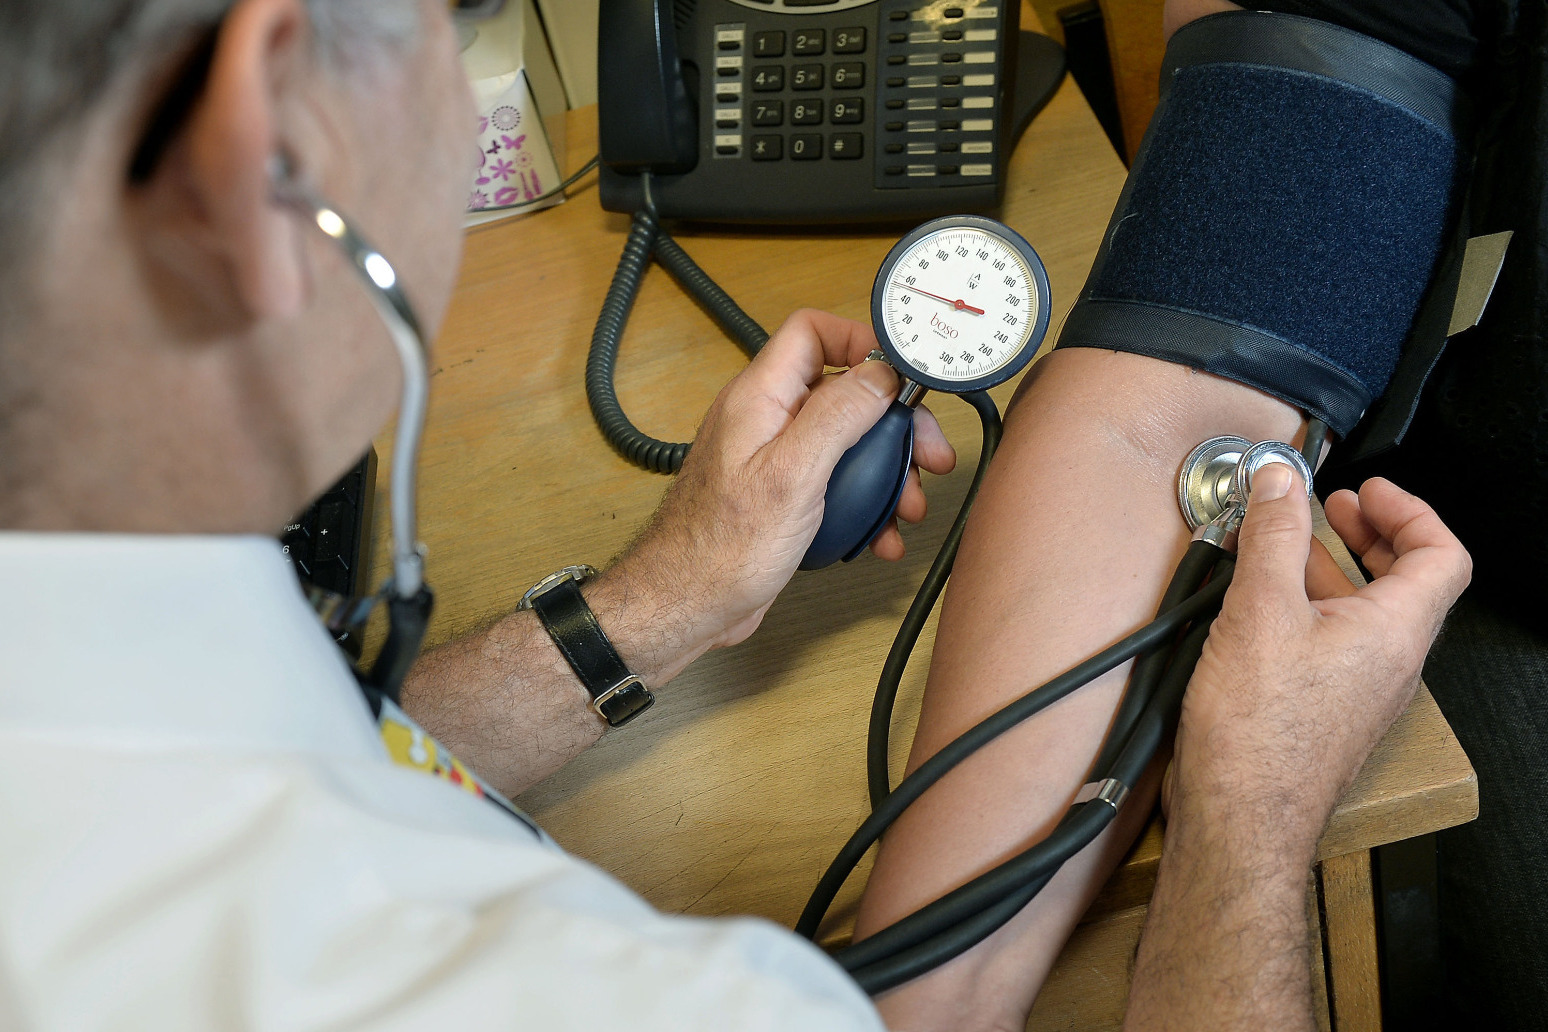 Teleconsultations with doctors are ‘worse but more convenient’ 